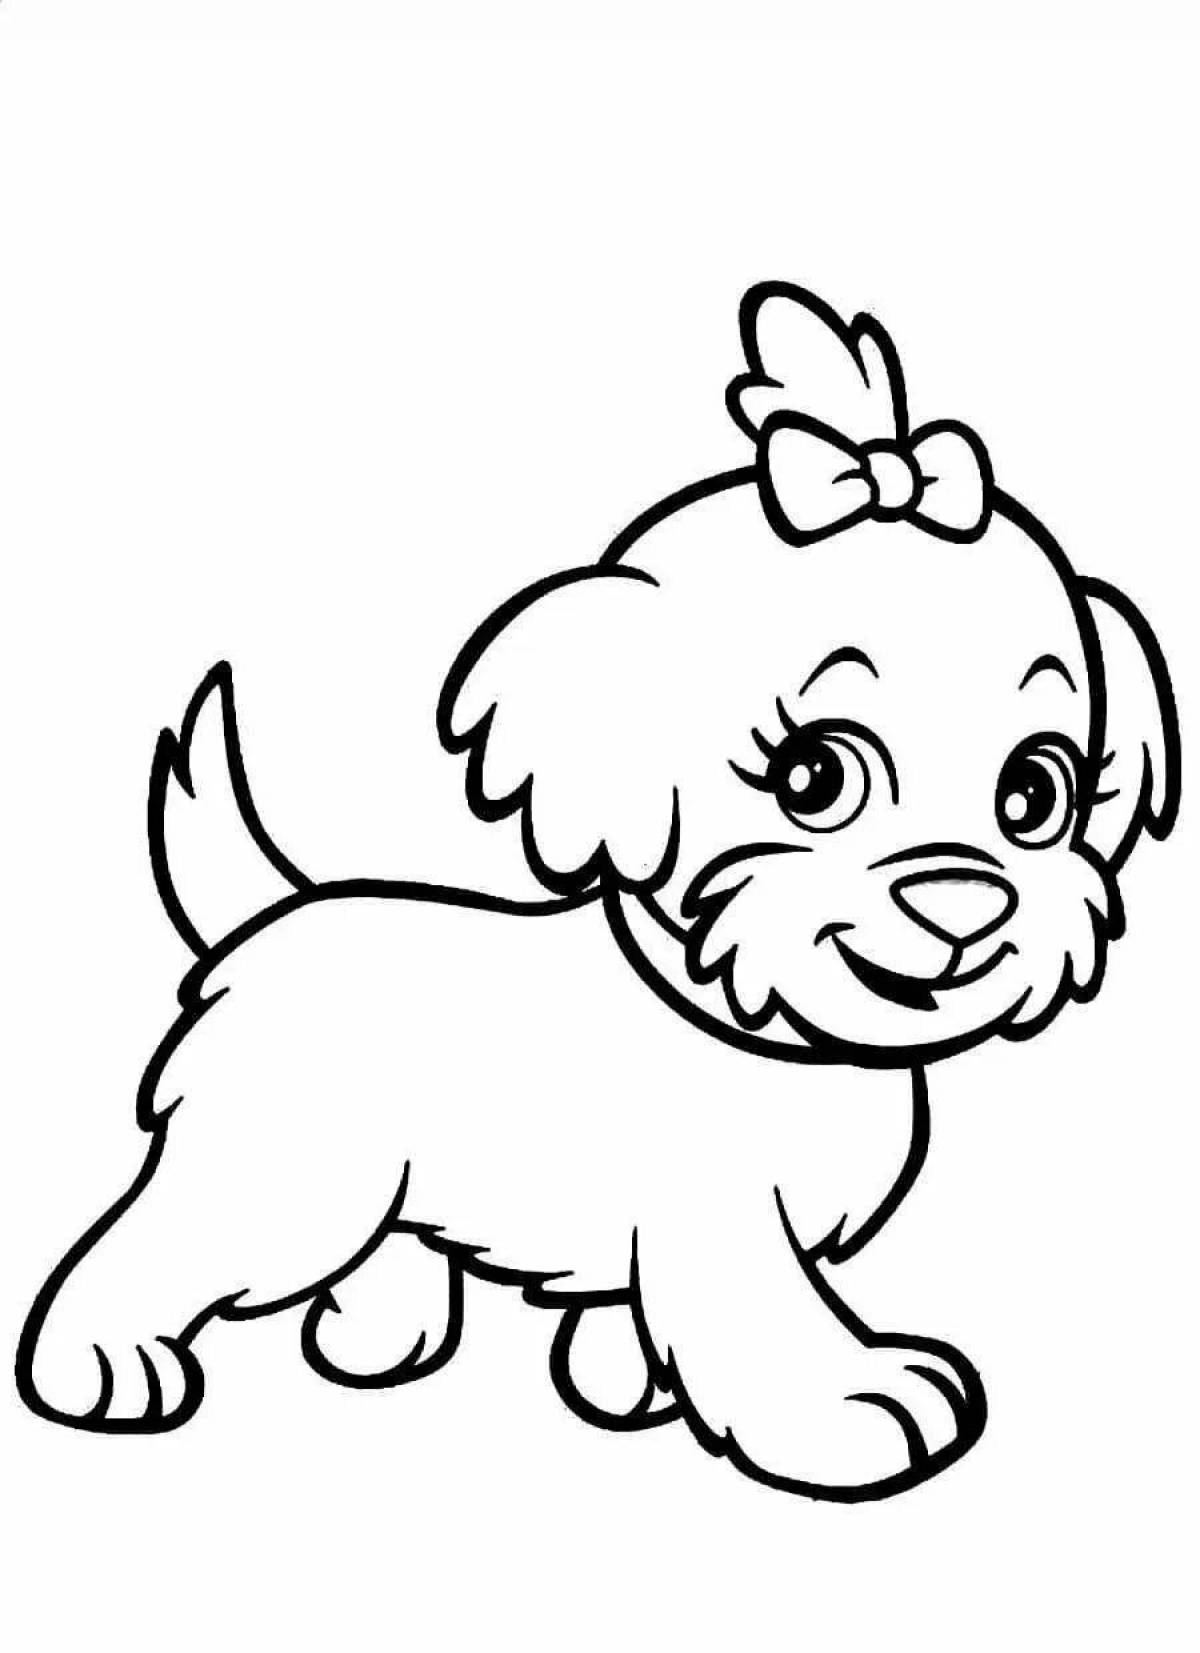 Joyful coloring dog for children 5-6 years old